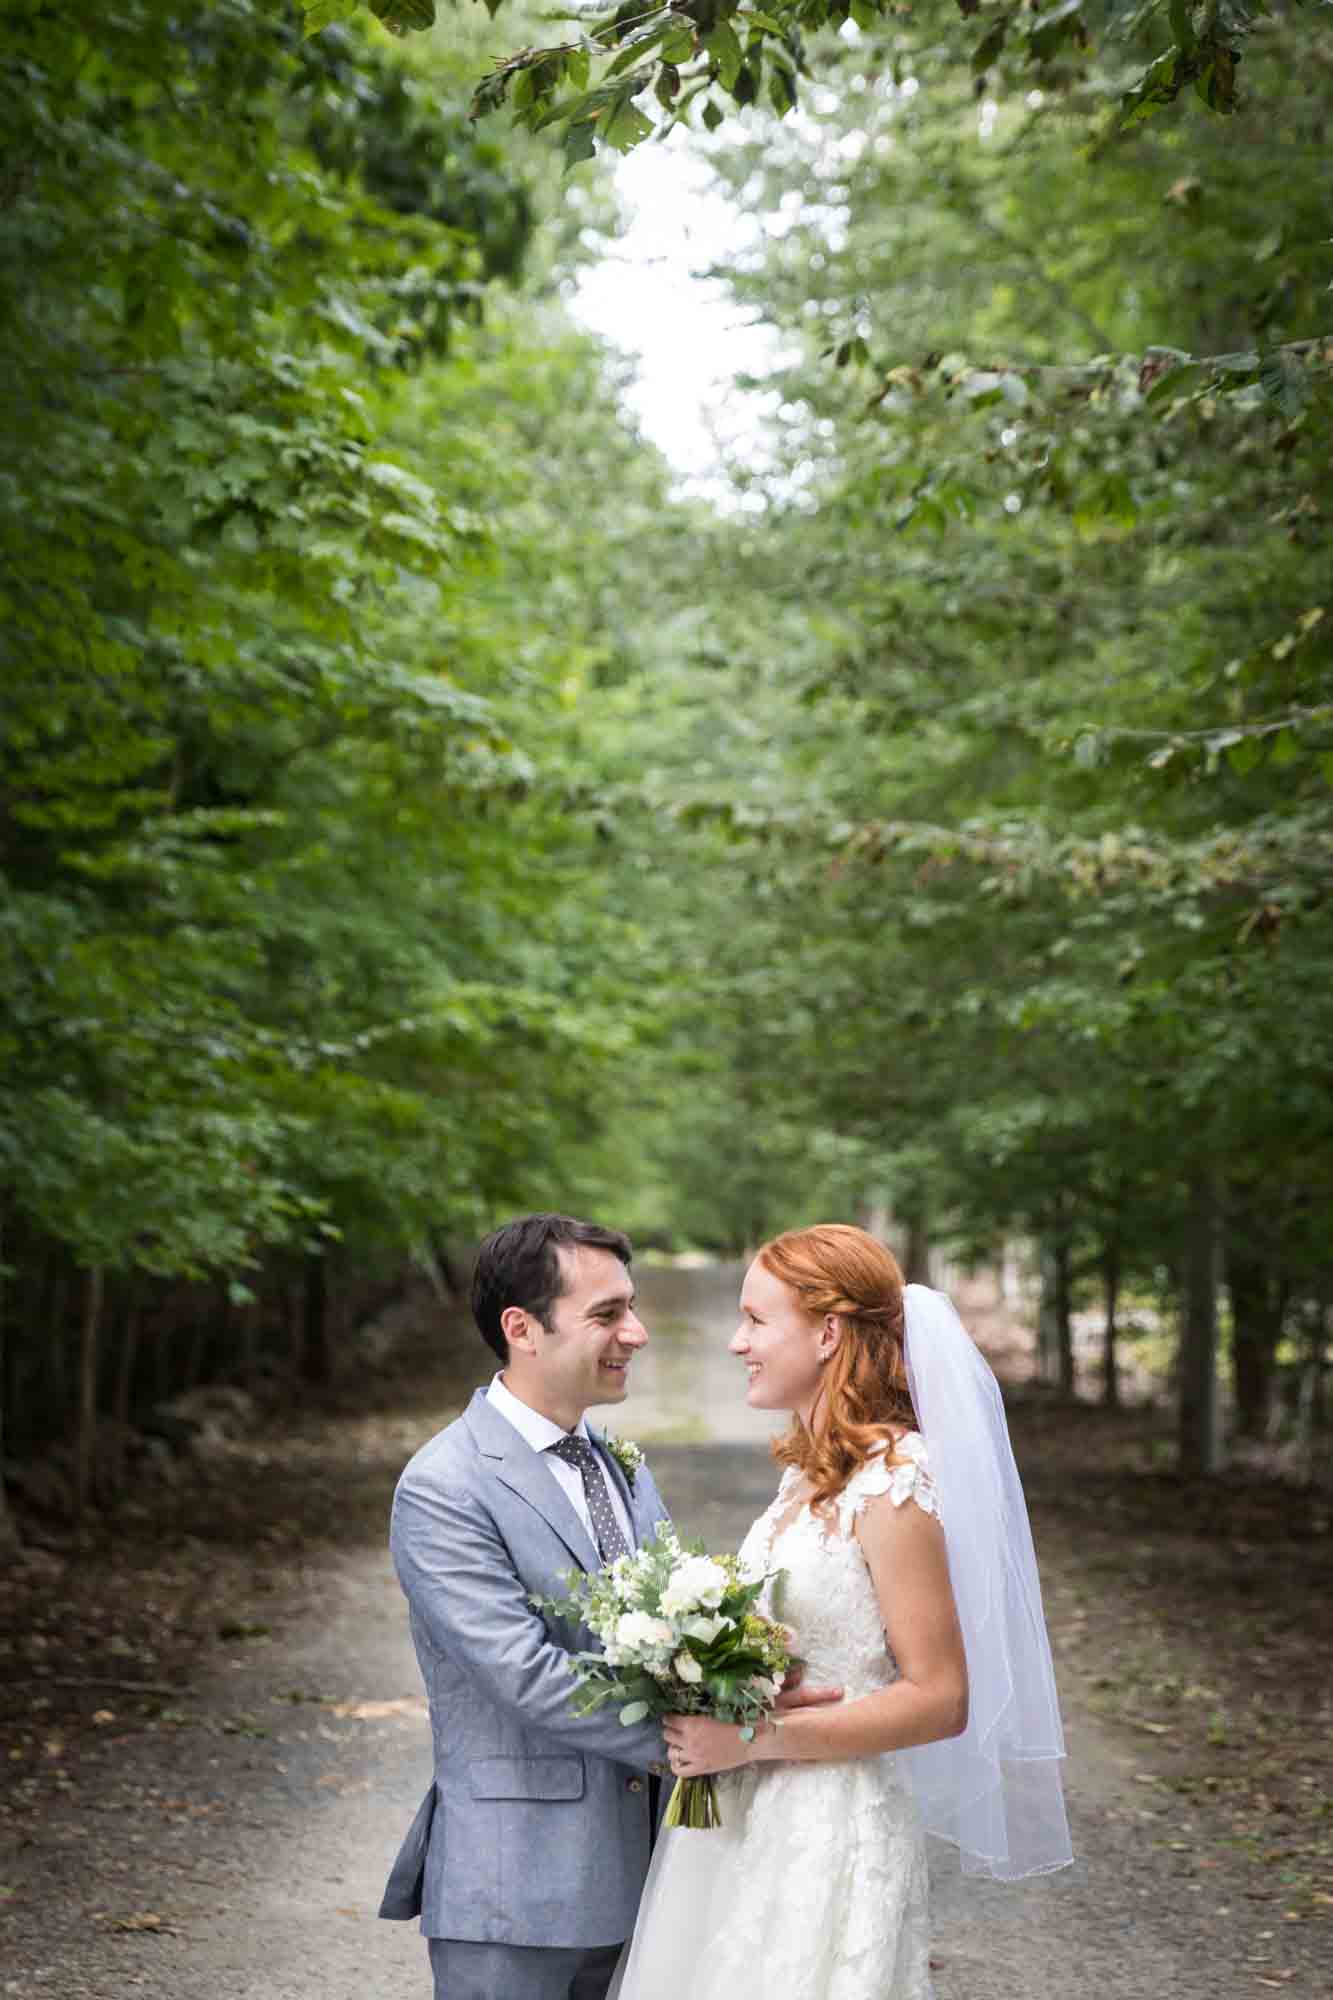 Bride and groom looking at each other with trees overhead for an article on backyard wedding tips